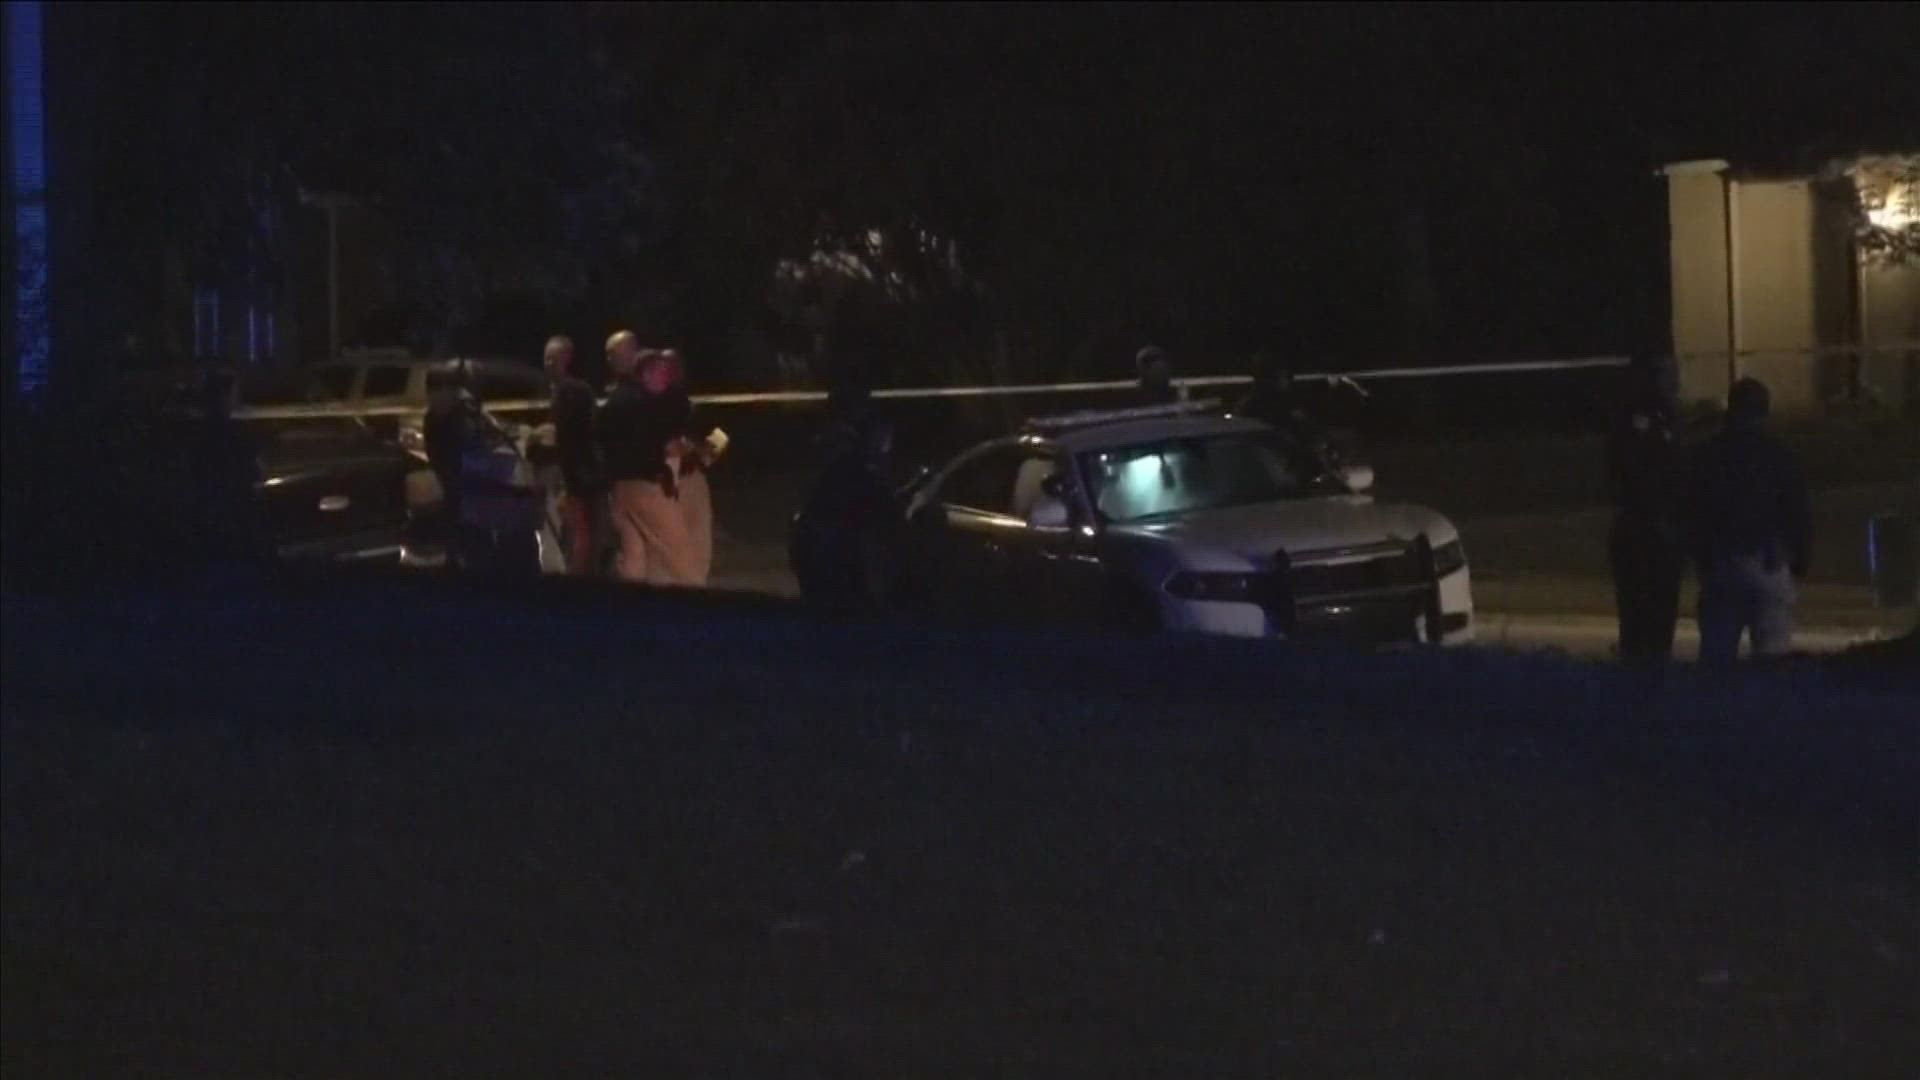 Police said they responded to the shooting on Whisper Valley Drive at 7:08 p.m.